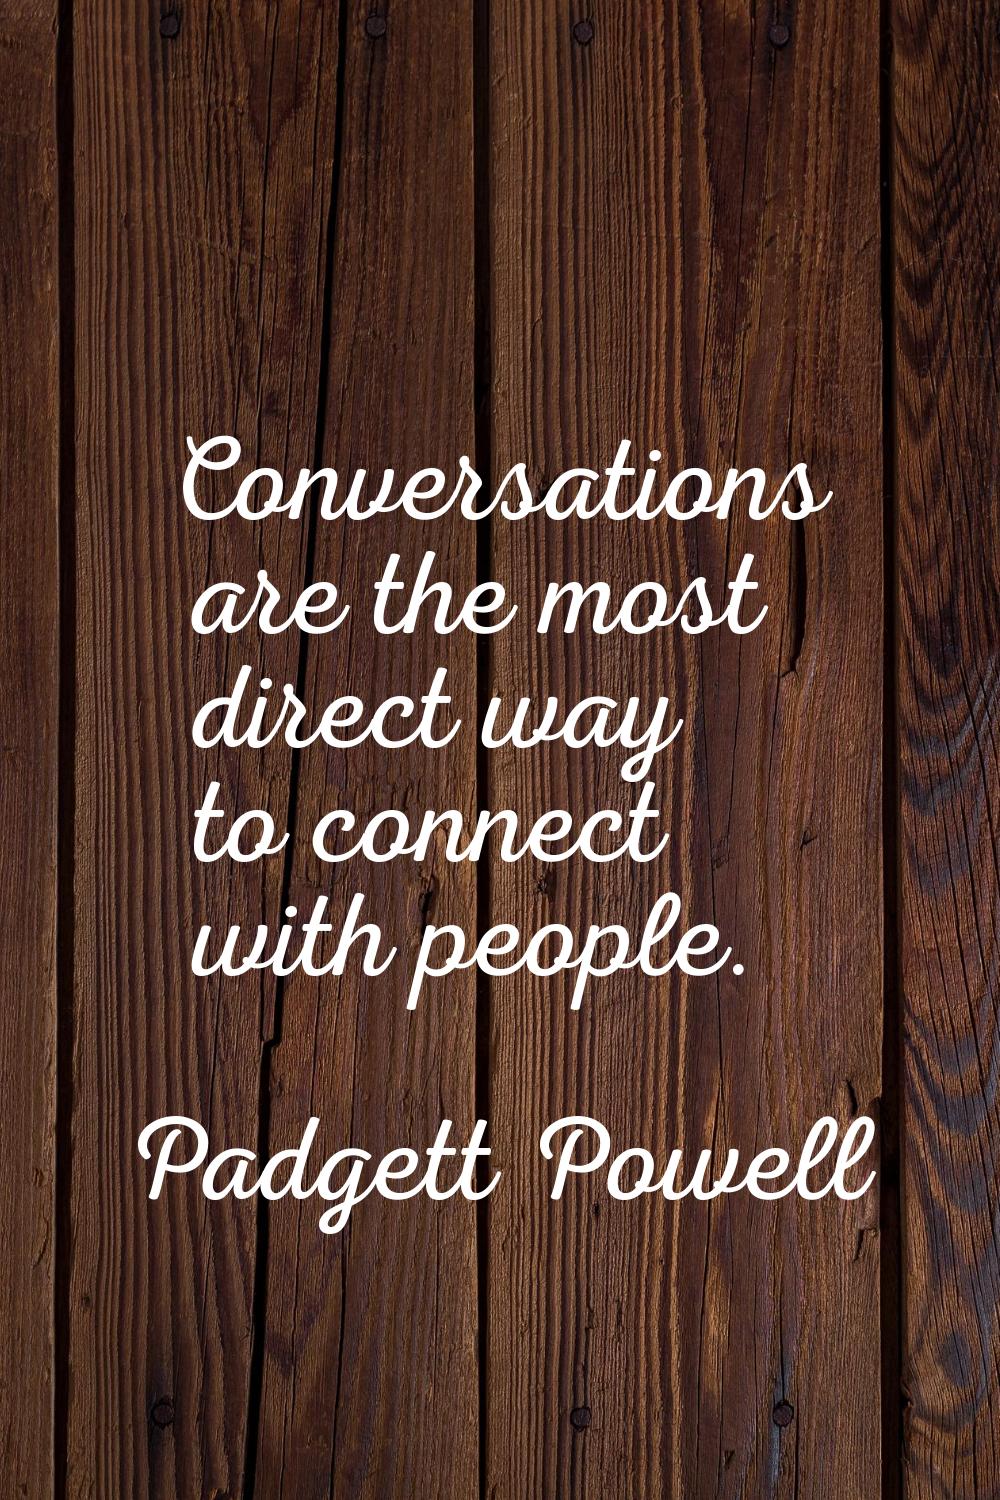 Conversations are the most direct way to connect with people.